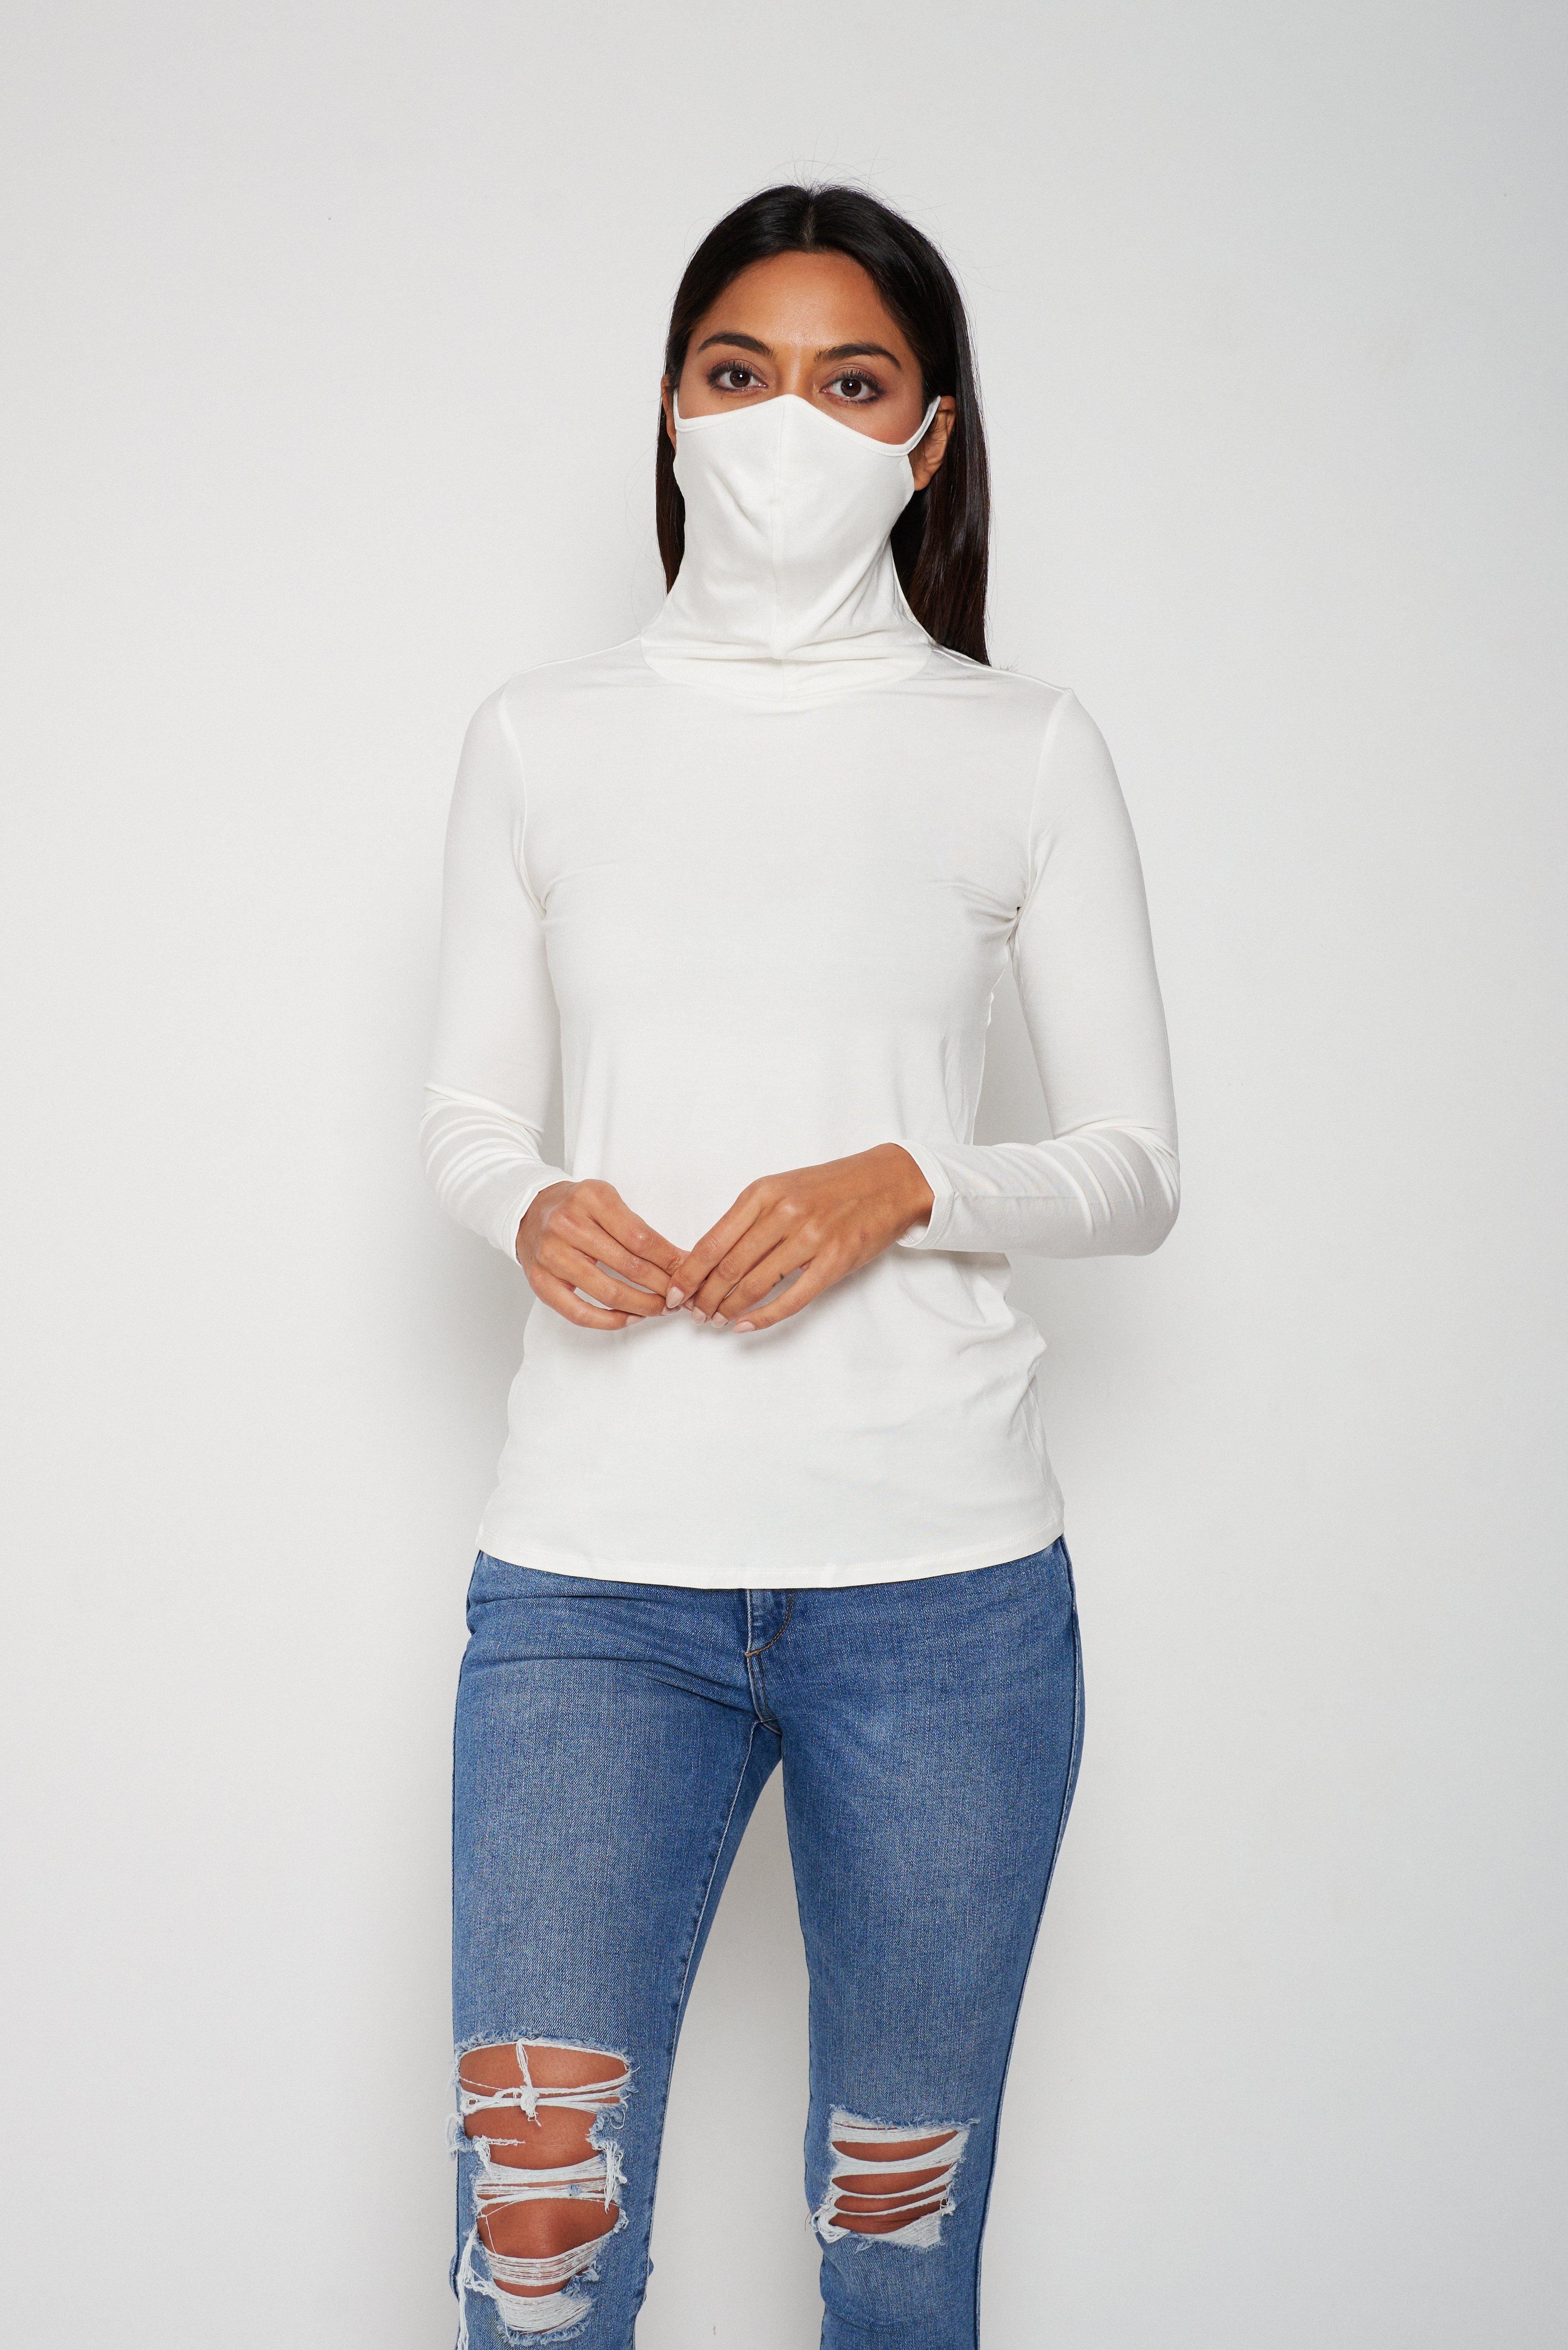 Adult Long Sleeve Ivory White Shmask™ Earloop Face Mask for Kids and Adults